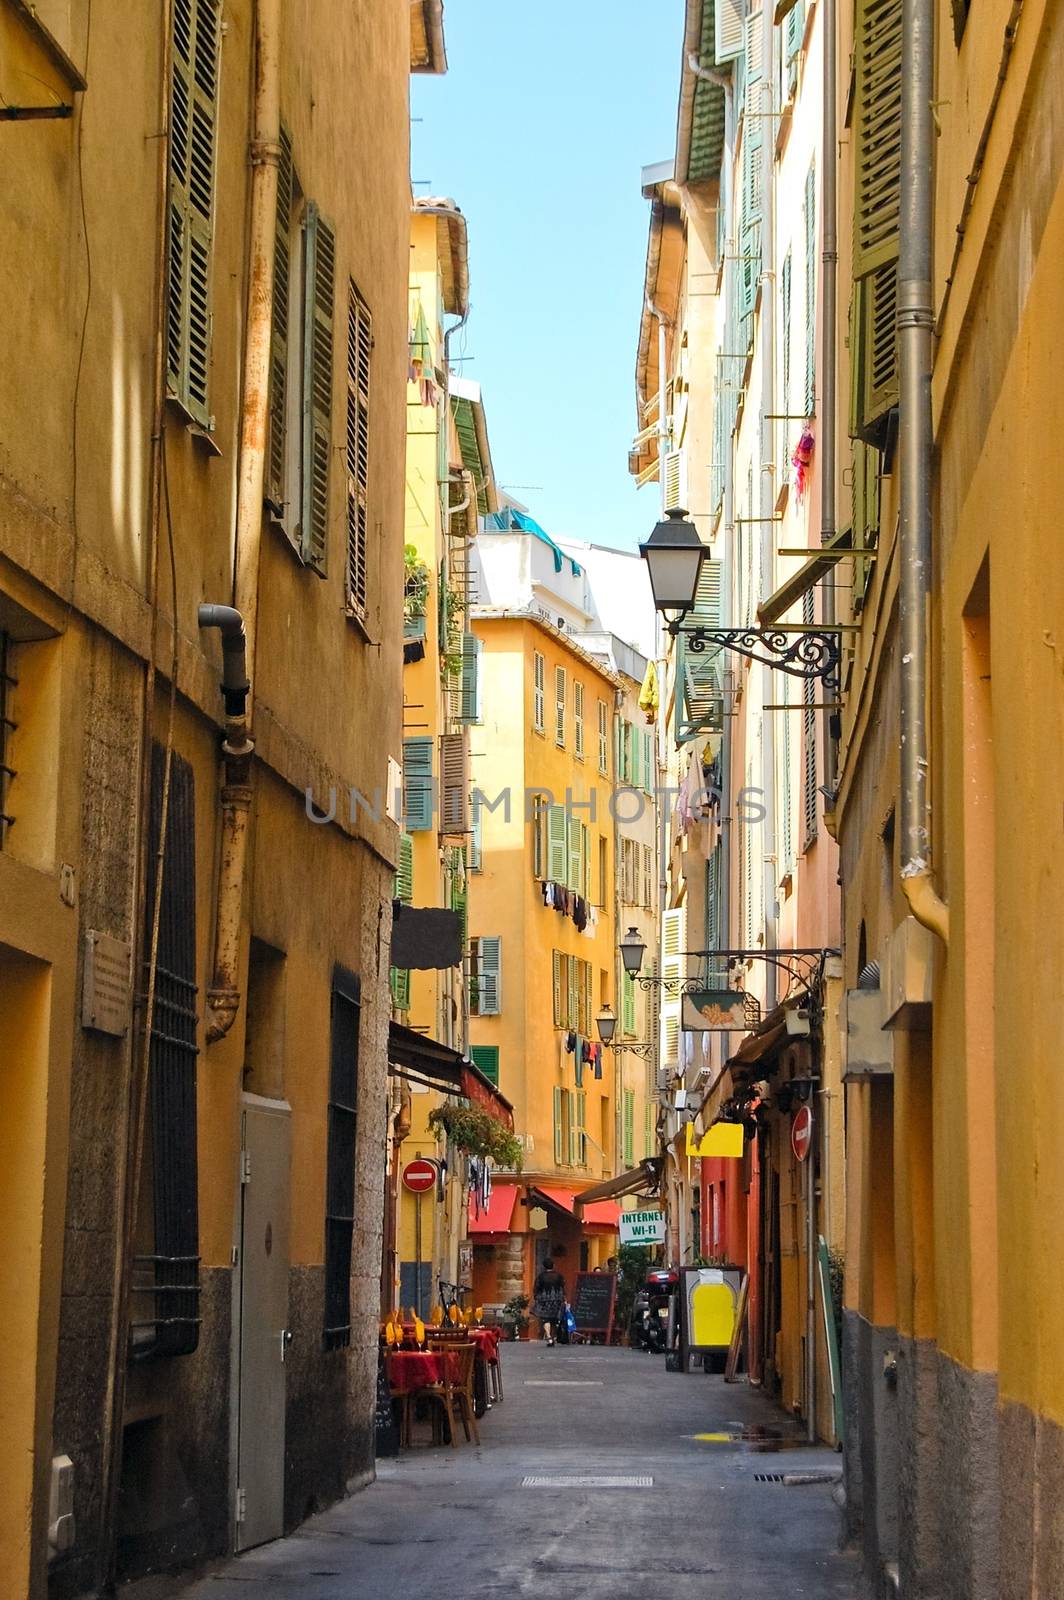 Typical street in Nice, France